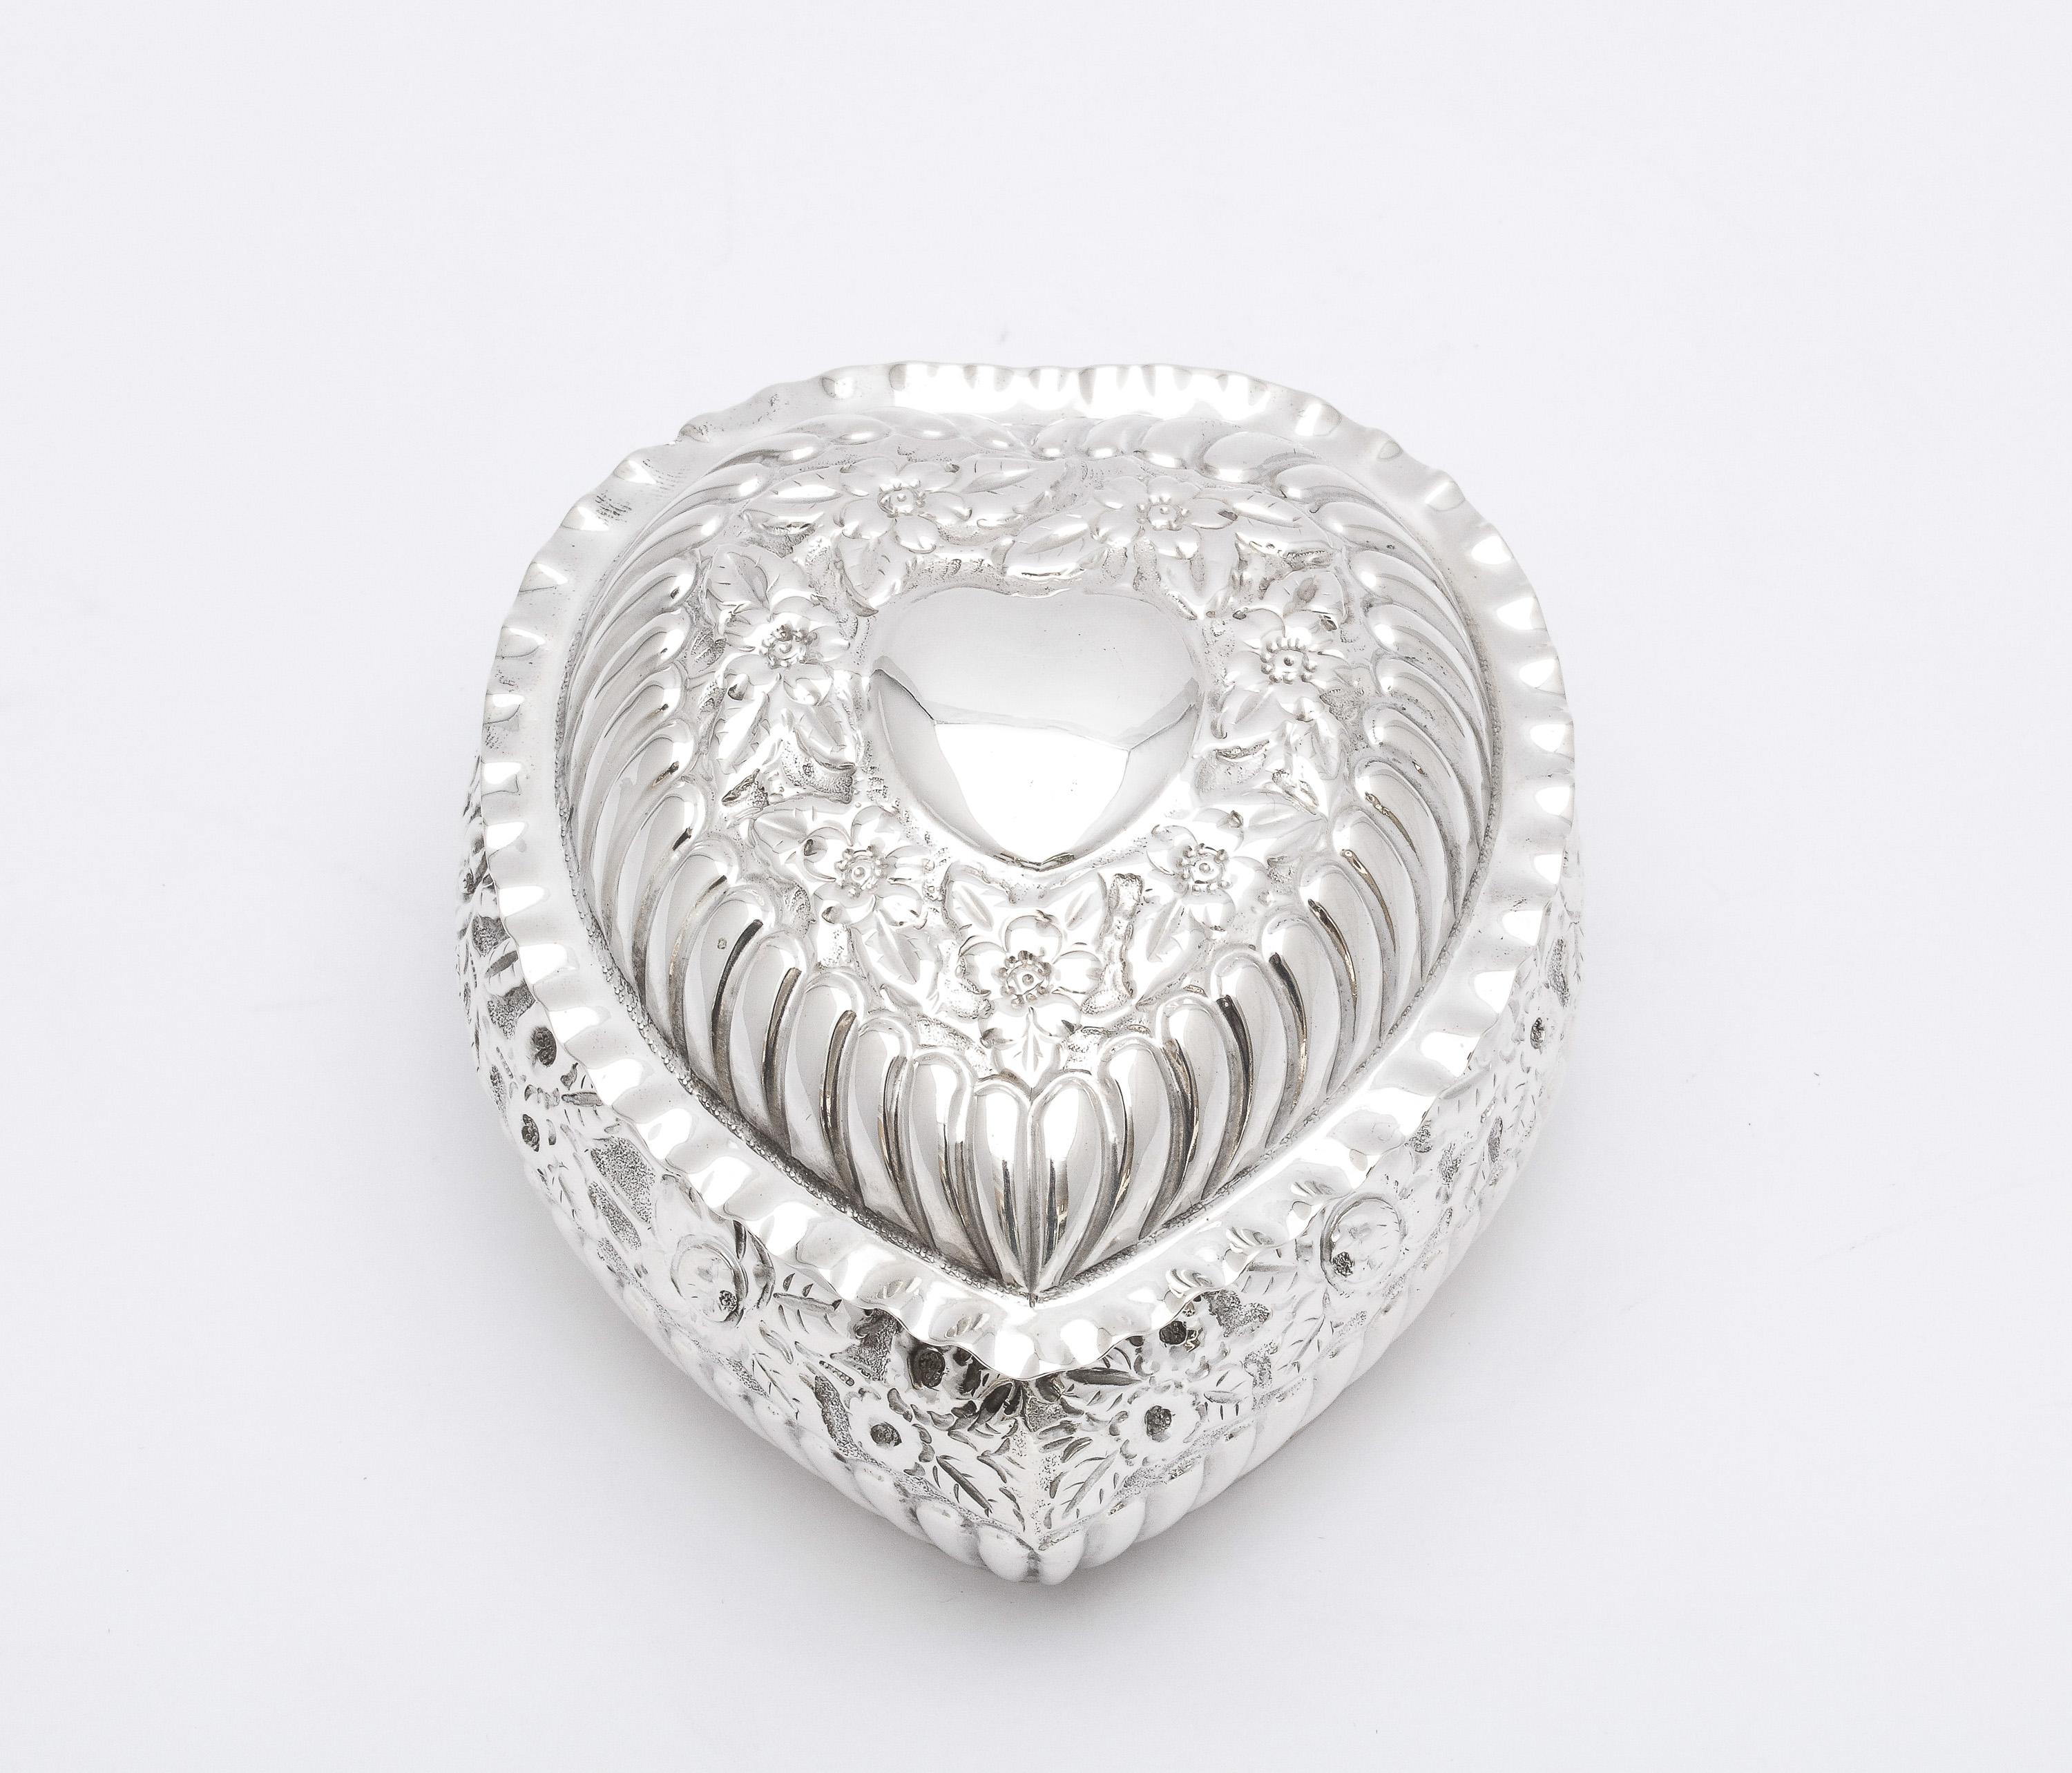 English Victorian Sterling Silver Heart-Form Trinkets Box with Hinged Lid by Zimmerman